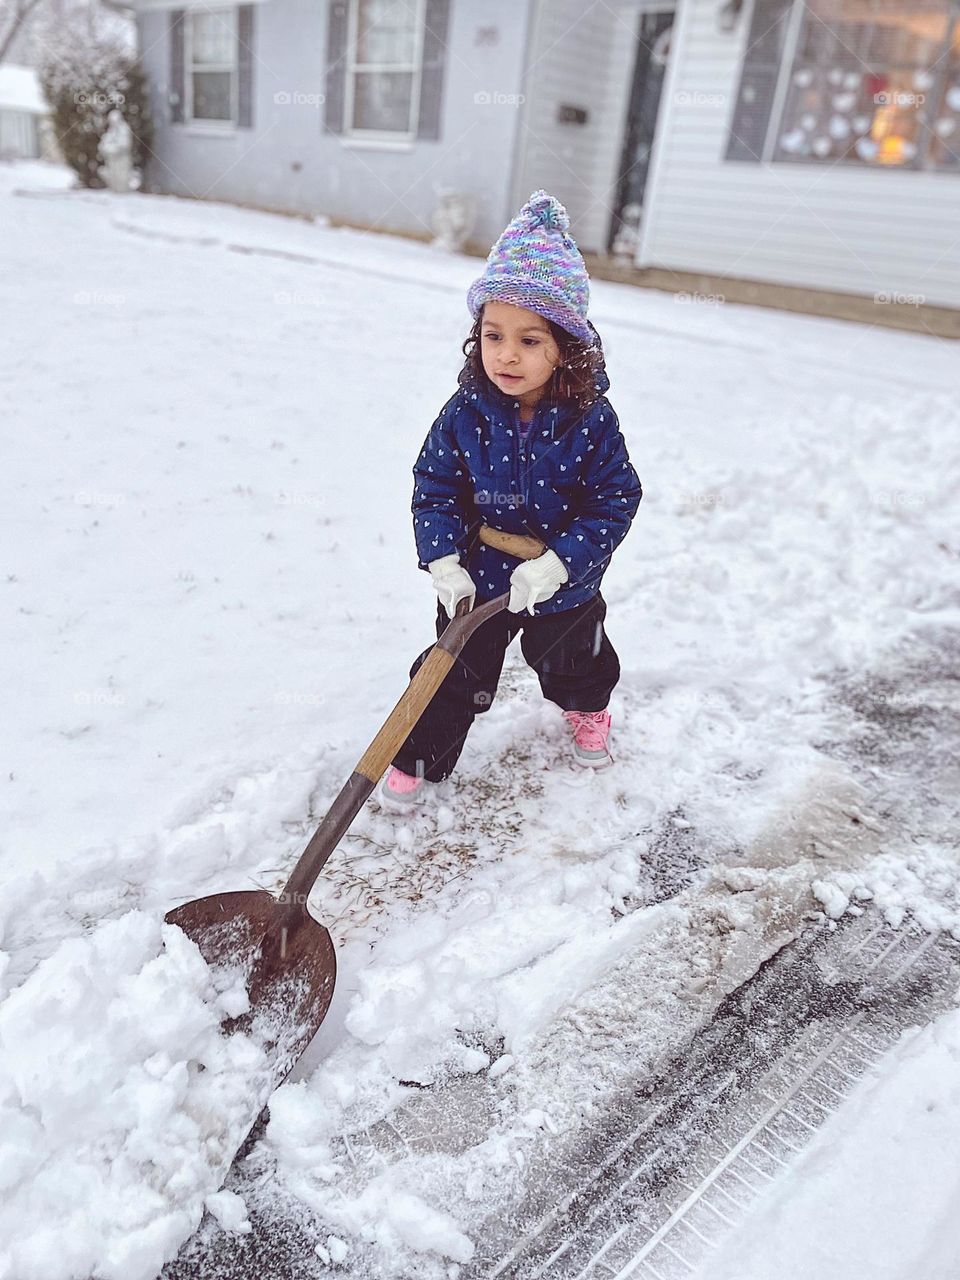 Toddler shoveling snow in the driveway, toddler helps with chores, toddler clearing piles of snow, cleaning up after a winter storm, toddler dressed in warm winter clothes, snow shoveling in the winter, winter wonderland 